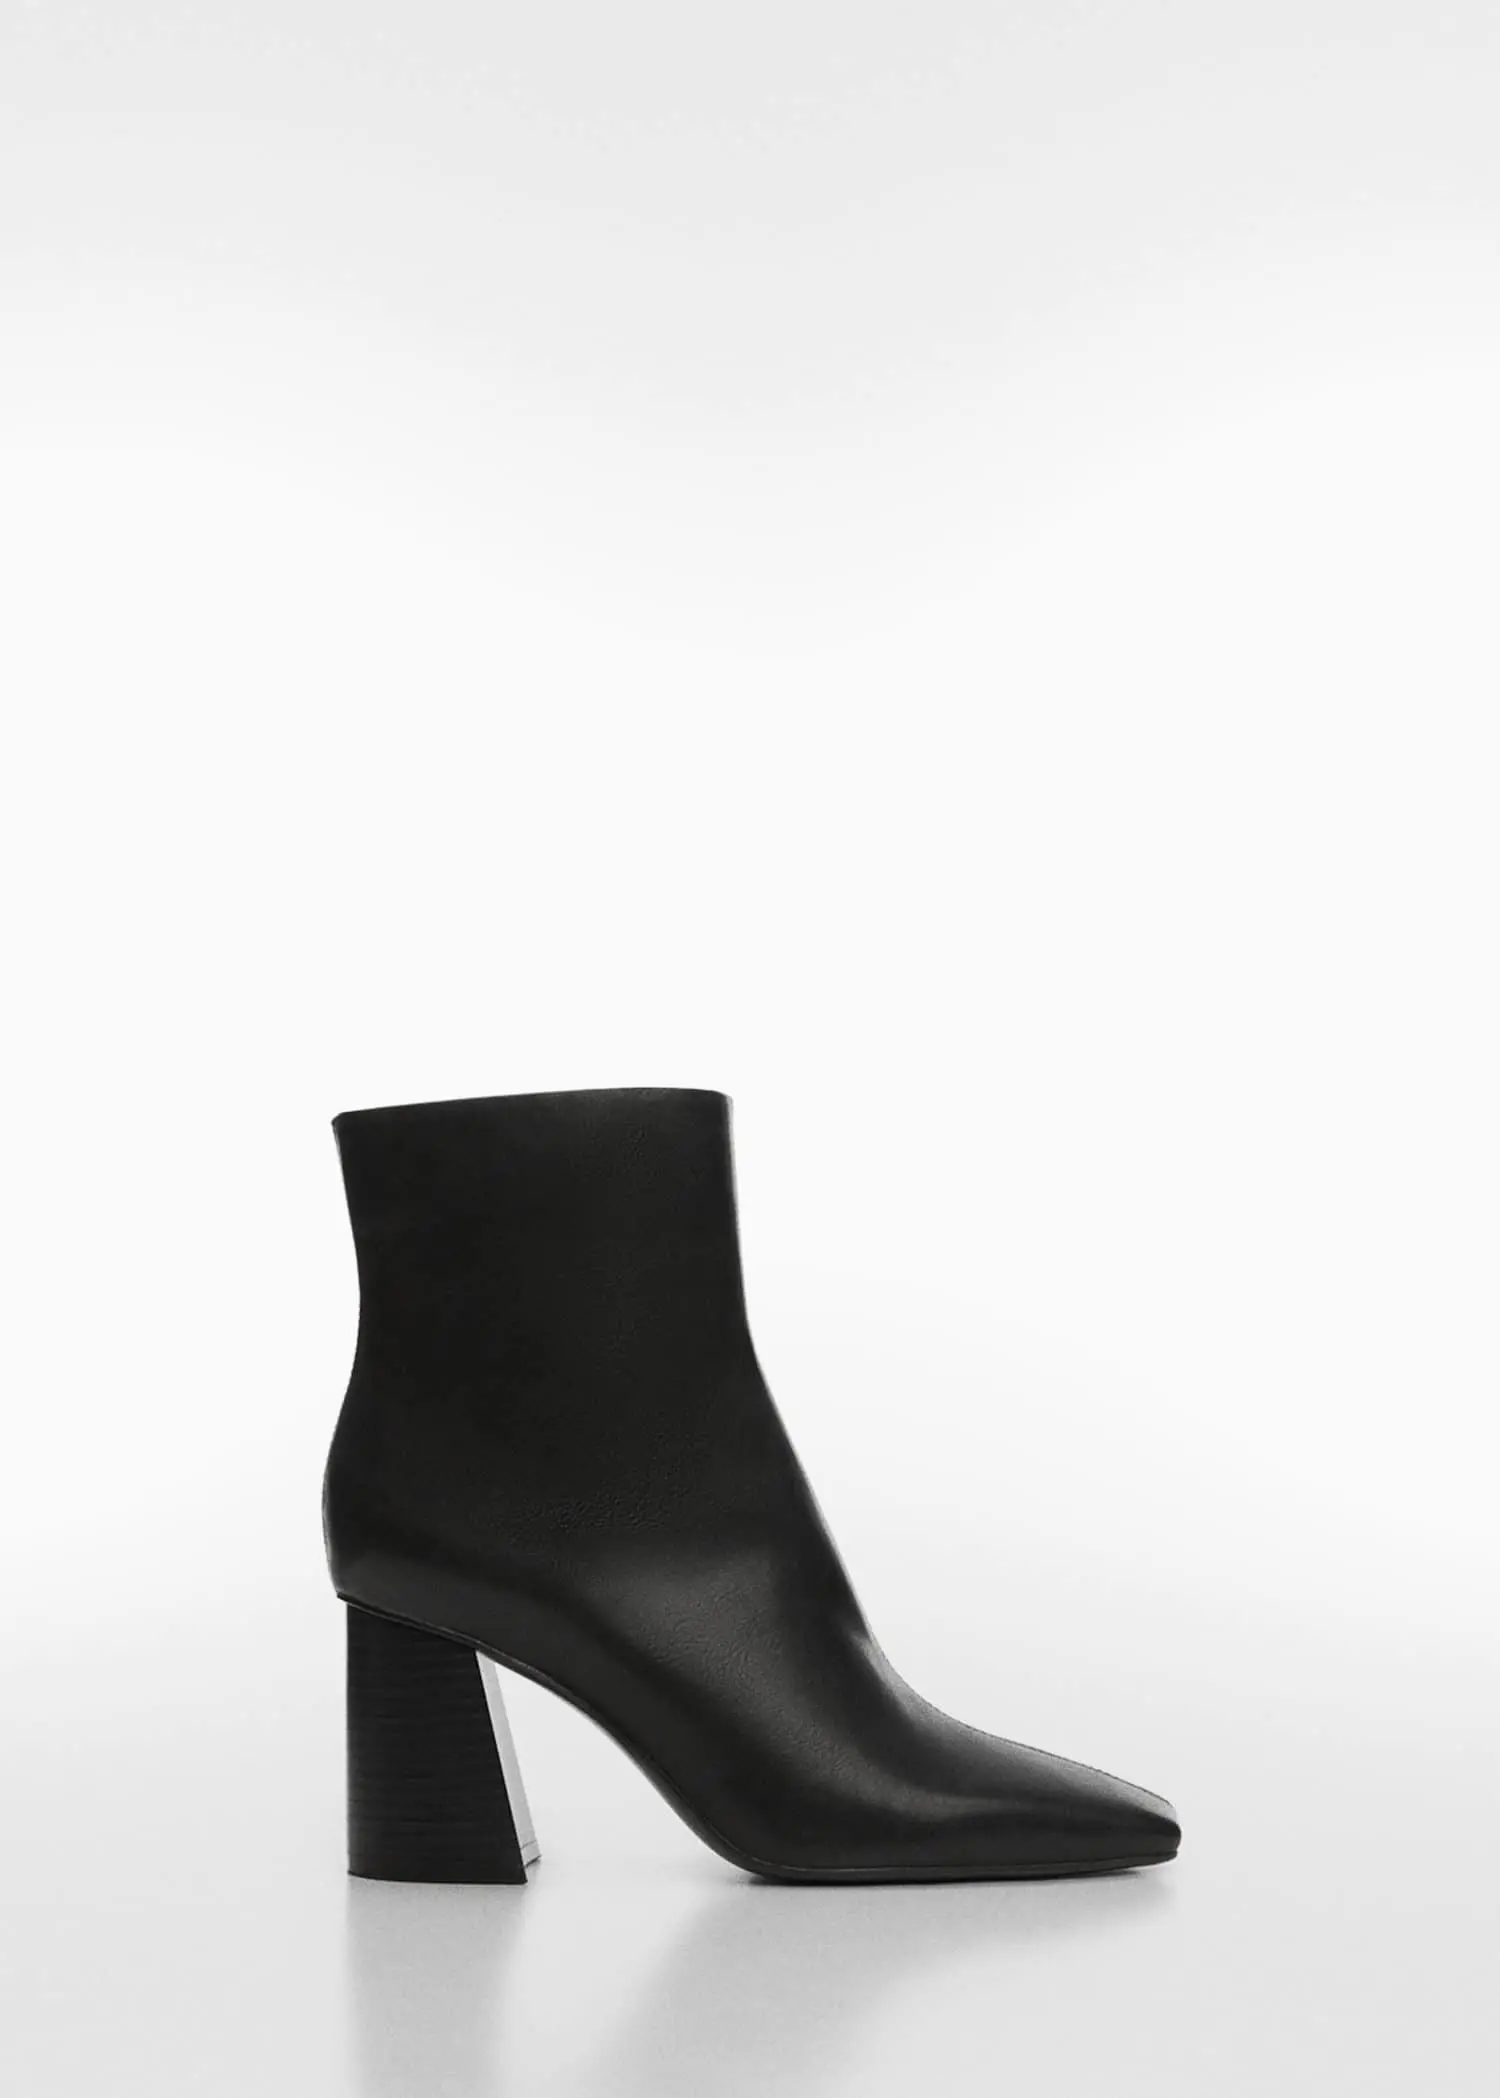 Mango Ankle boots with square toe heel. 1